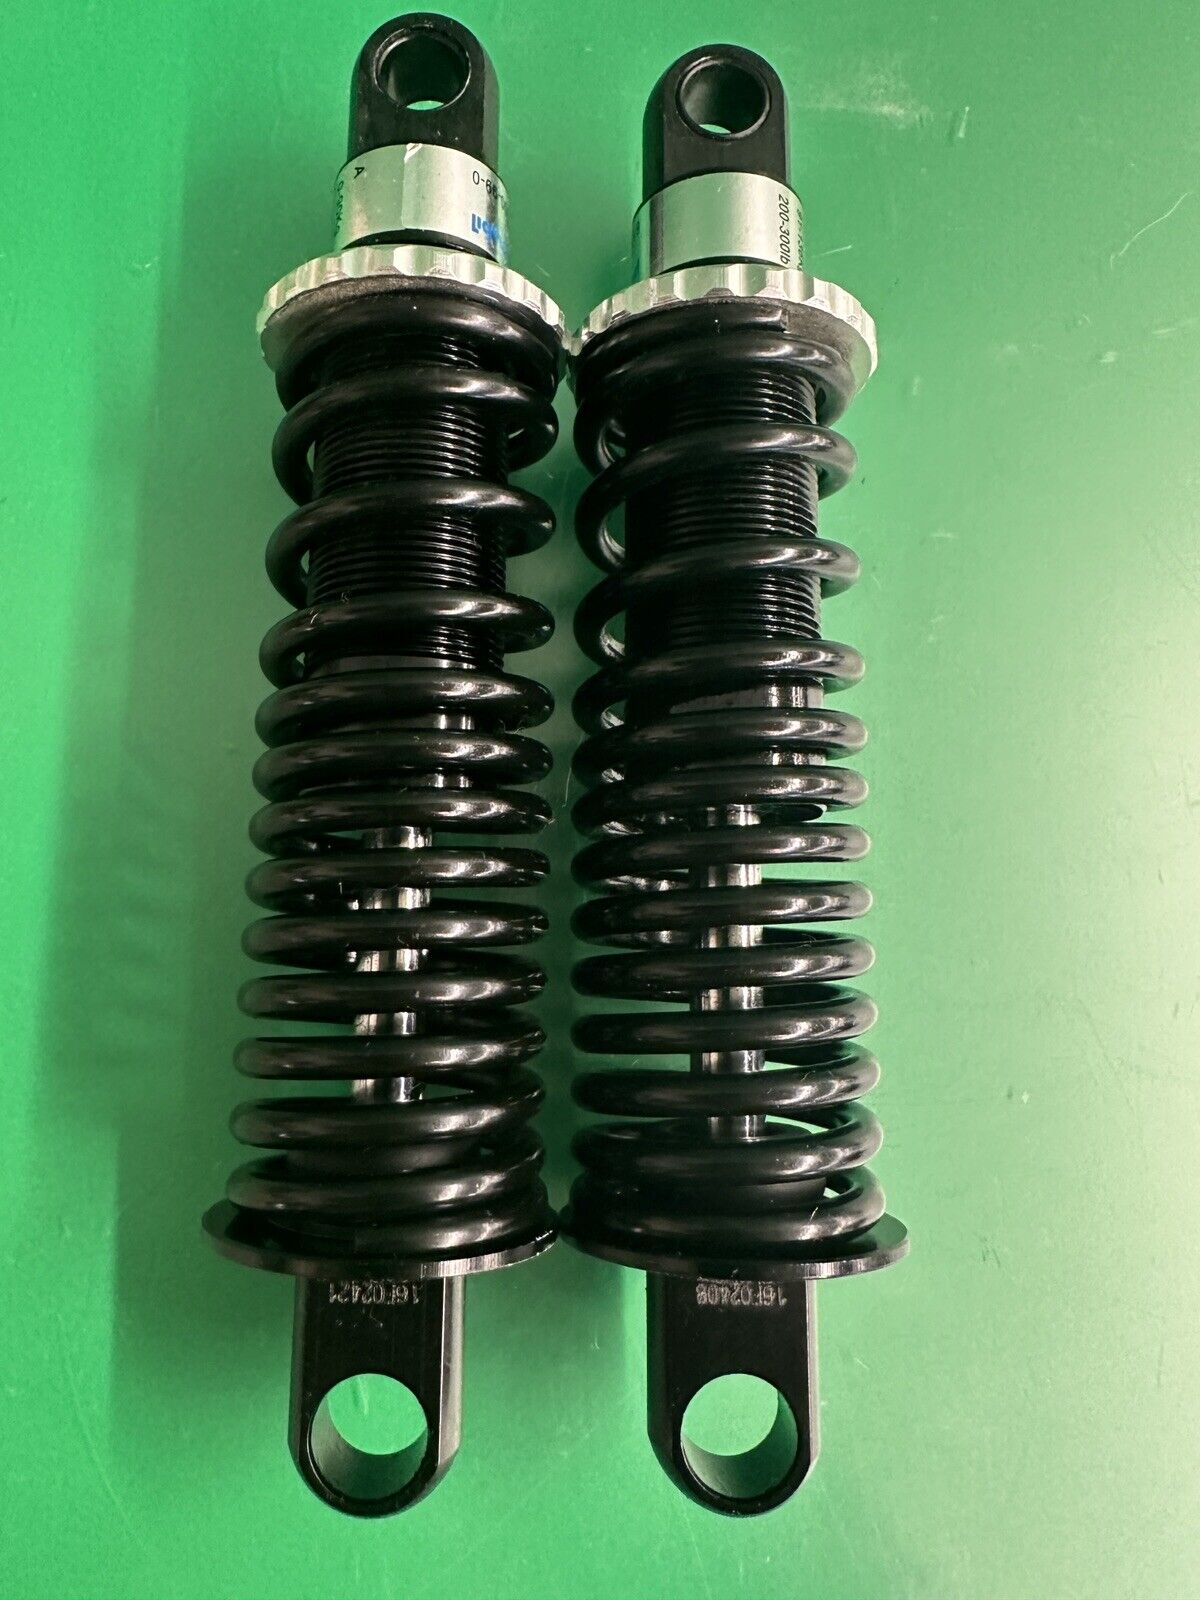 Set of 2 Shock Absorbers, Suspension for Permobil M300 Power Wheelchair #i440